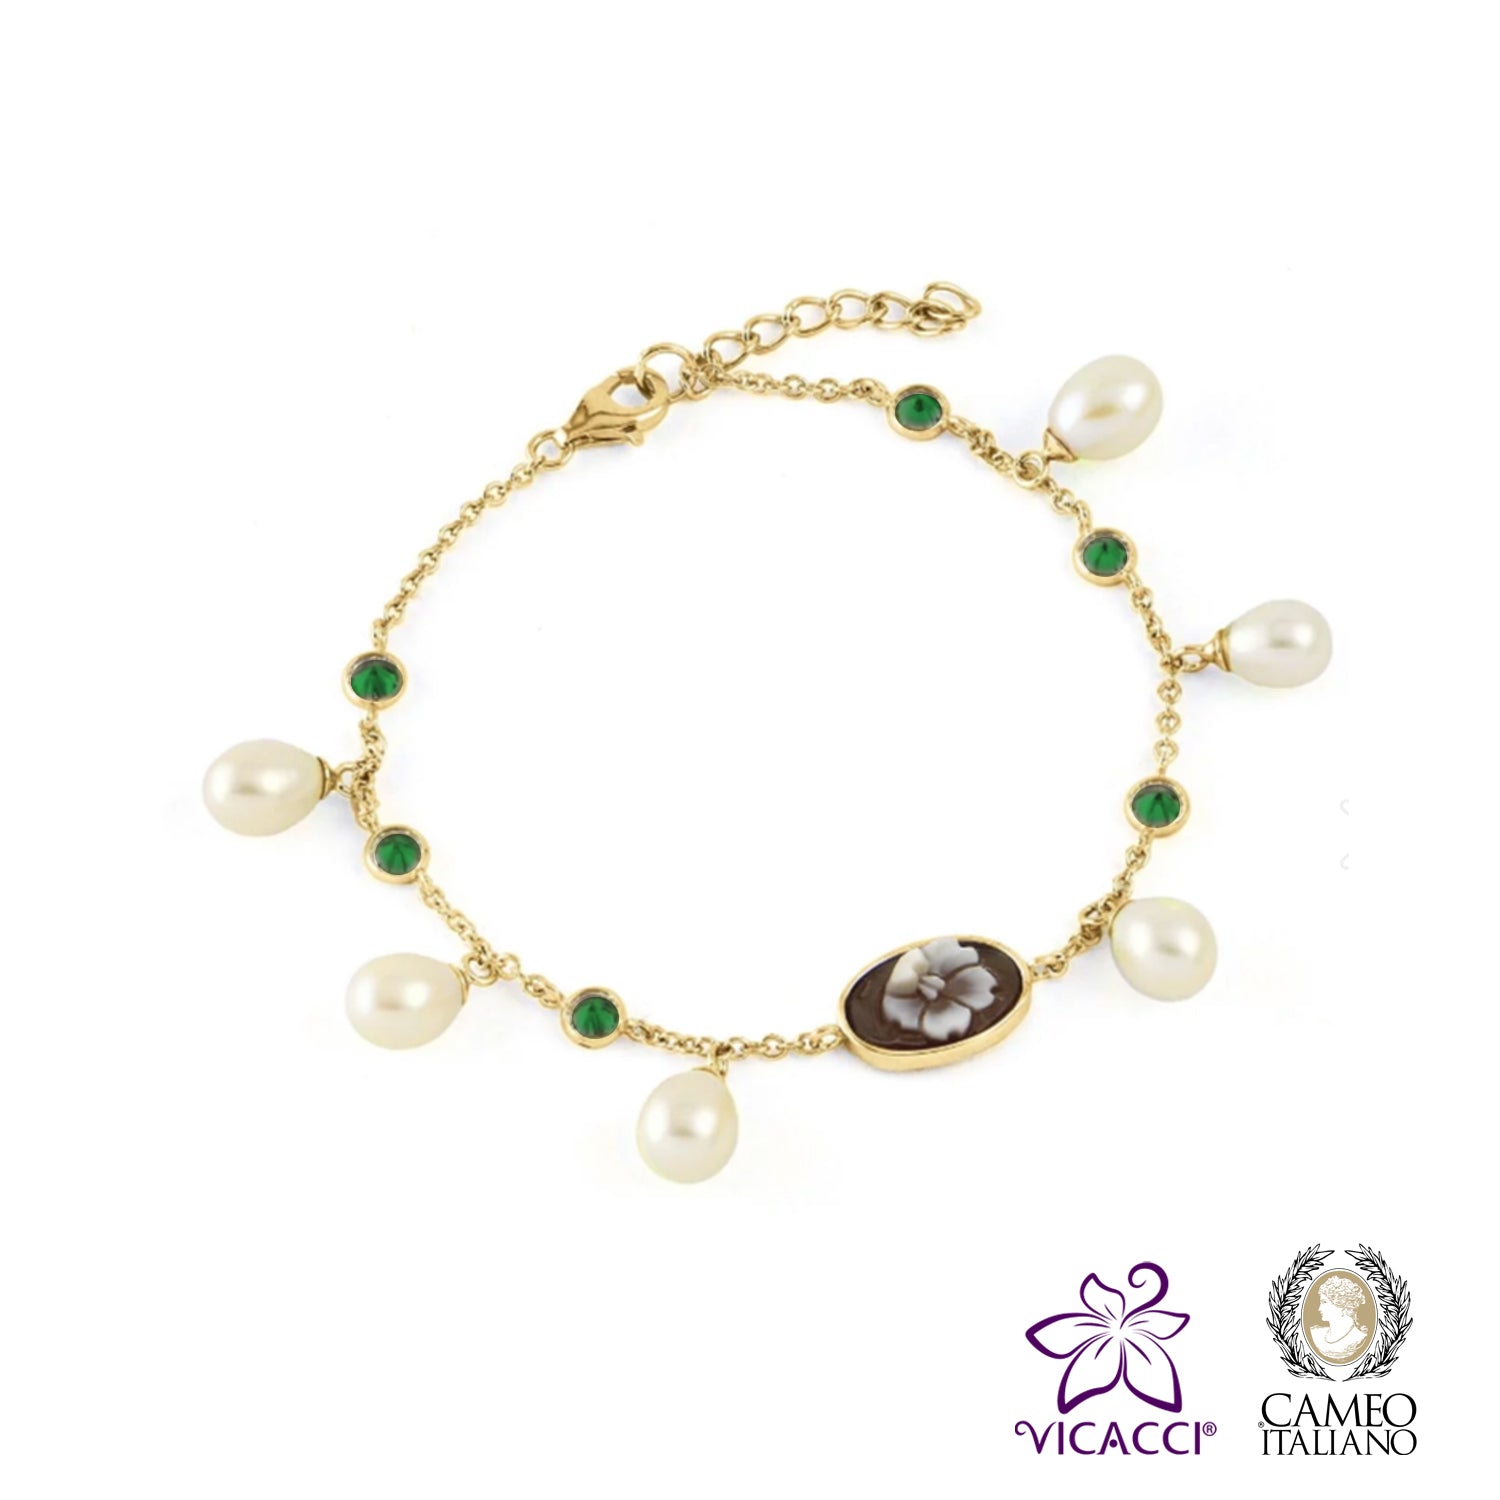 Cameo Italiano, BC4 Bracelet, 925 Sterling Silver Gold Plated